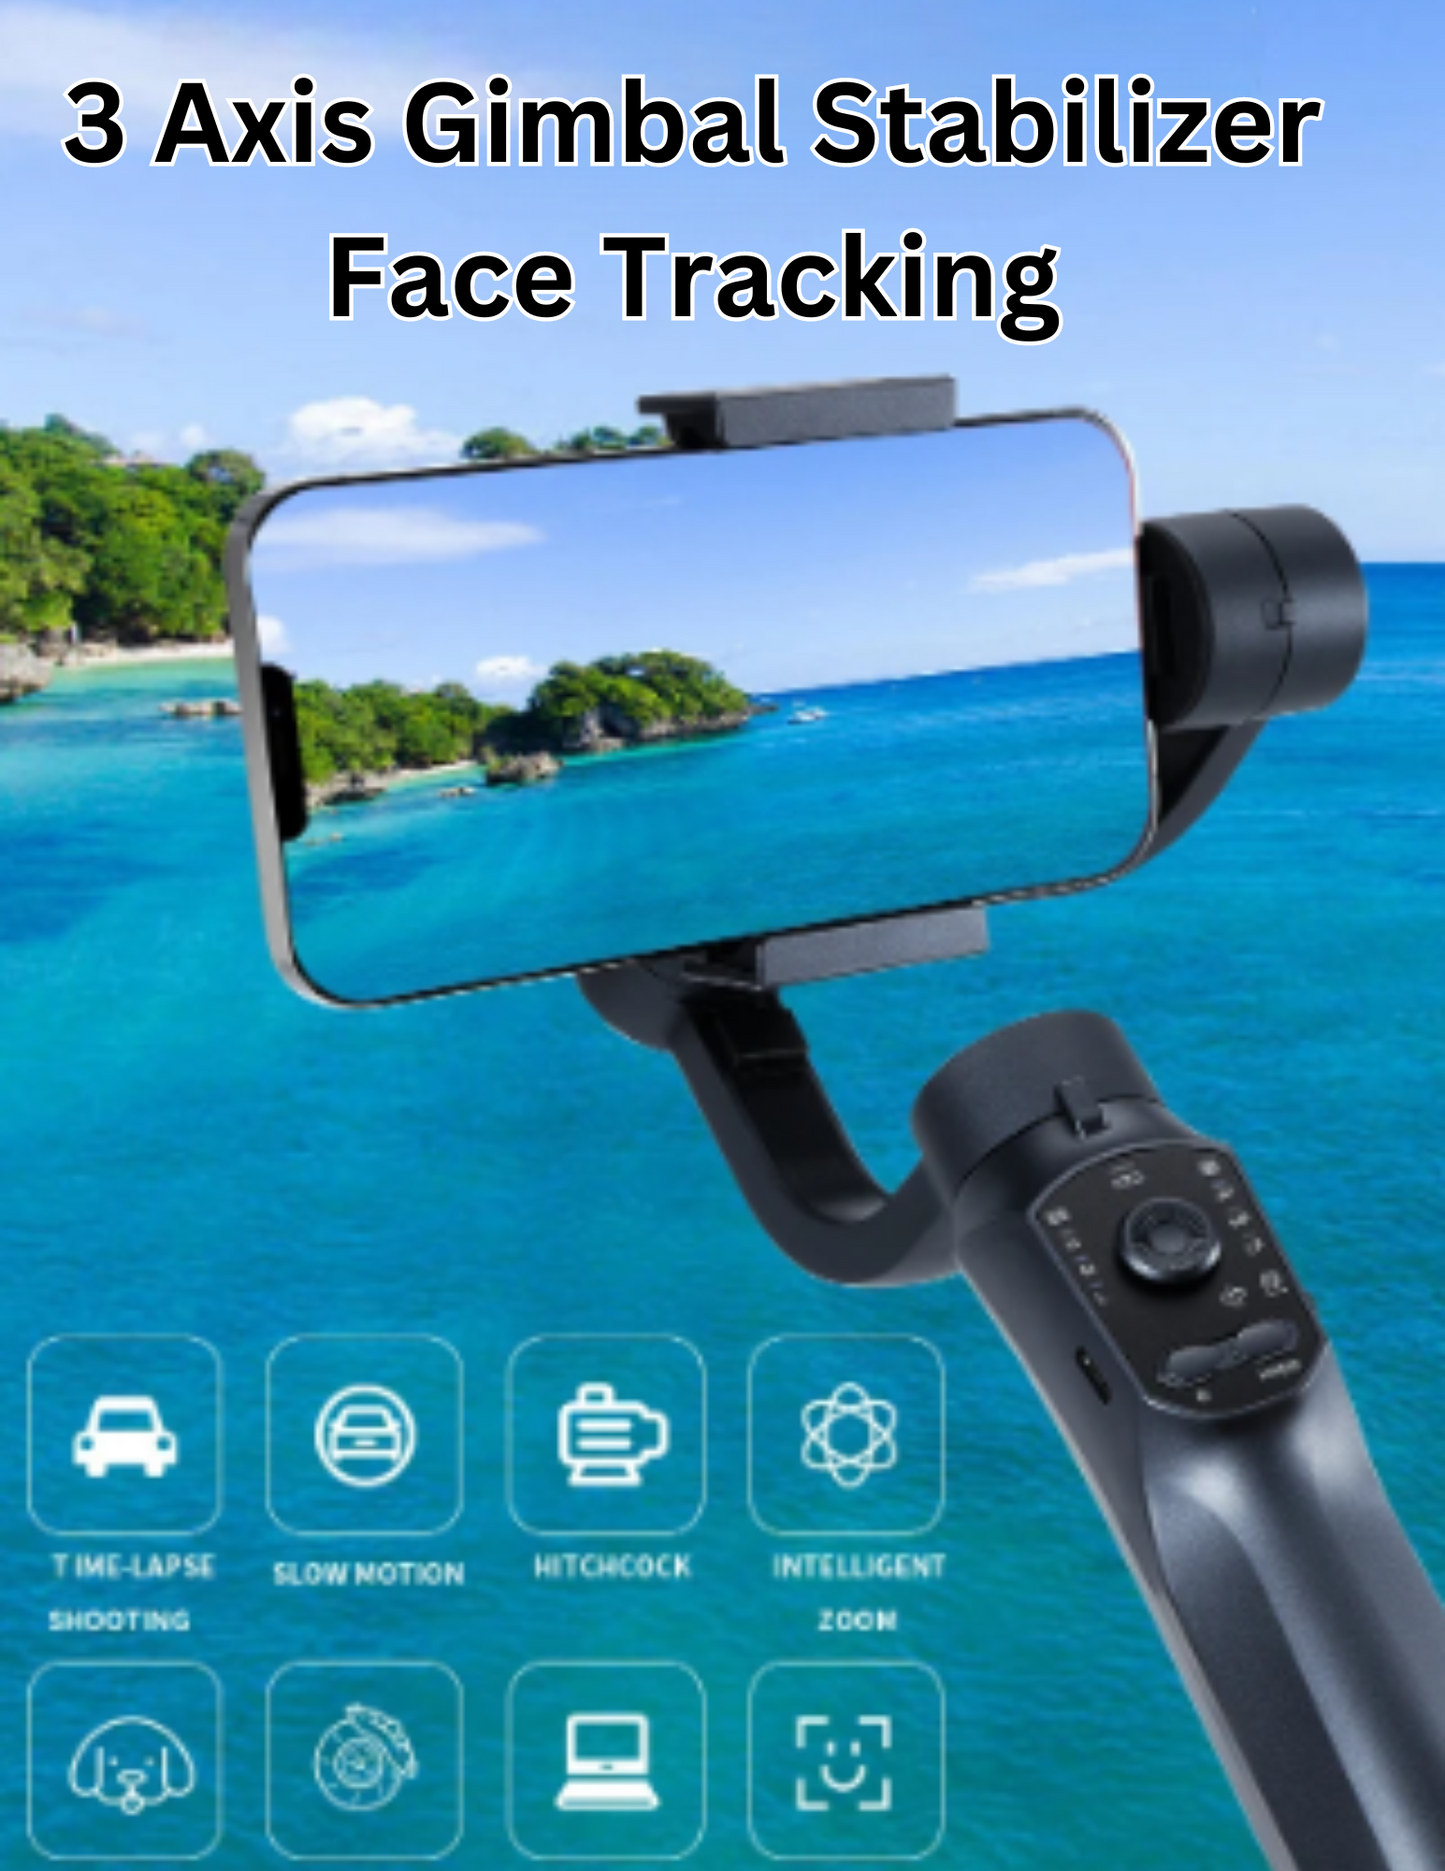 3 Axis Gimbal Stabilizer Face Tracking